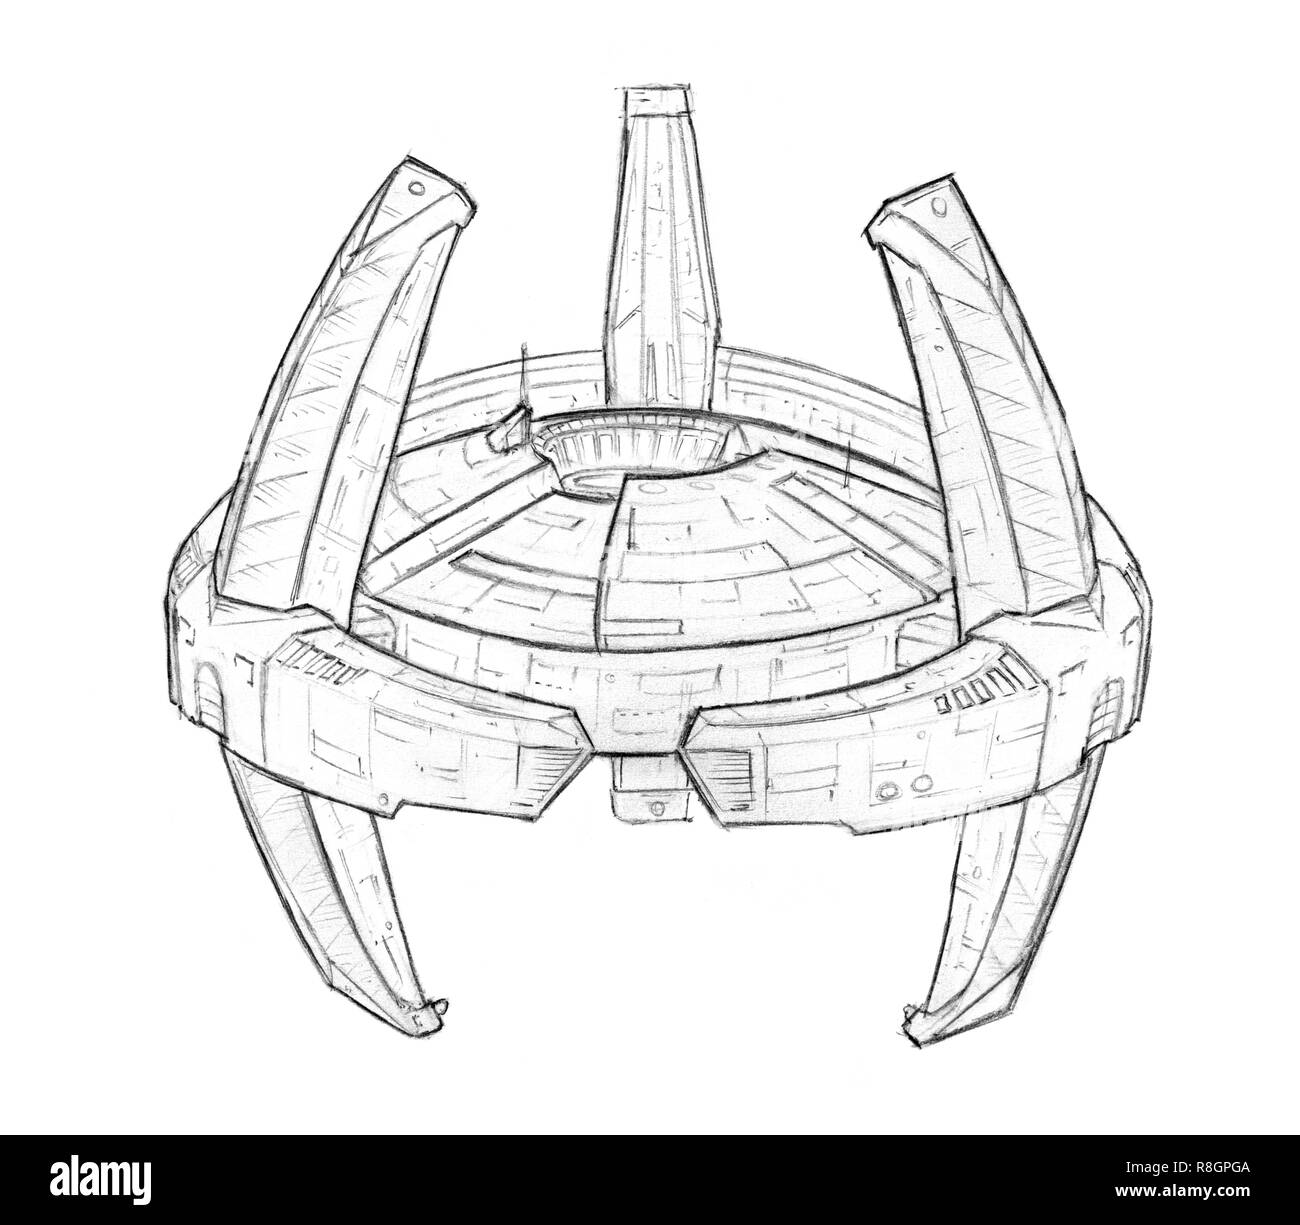 Pencil Concept Art Drawing of Futuristic Spacestation or Space Station Stock Photo